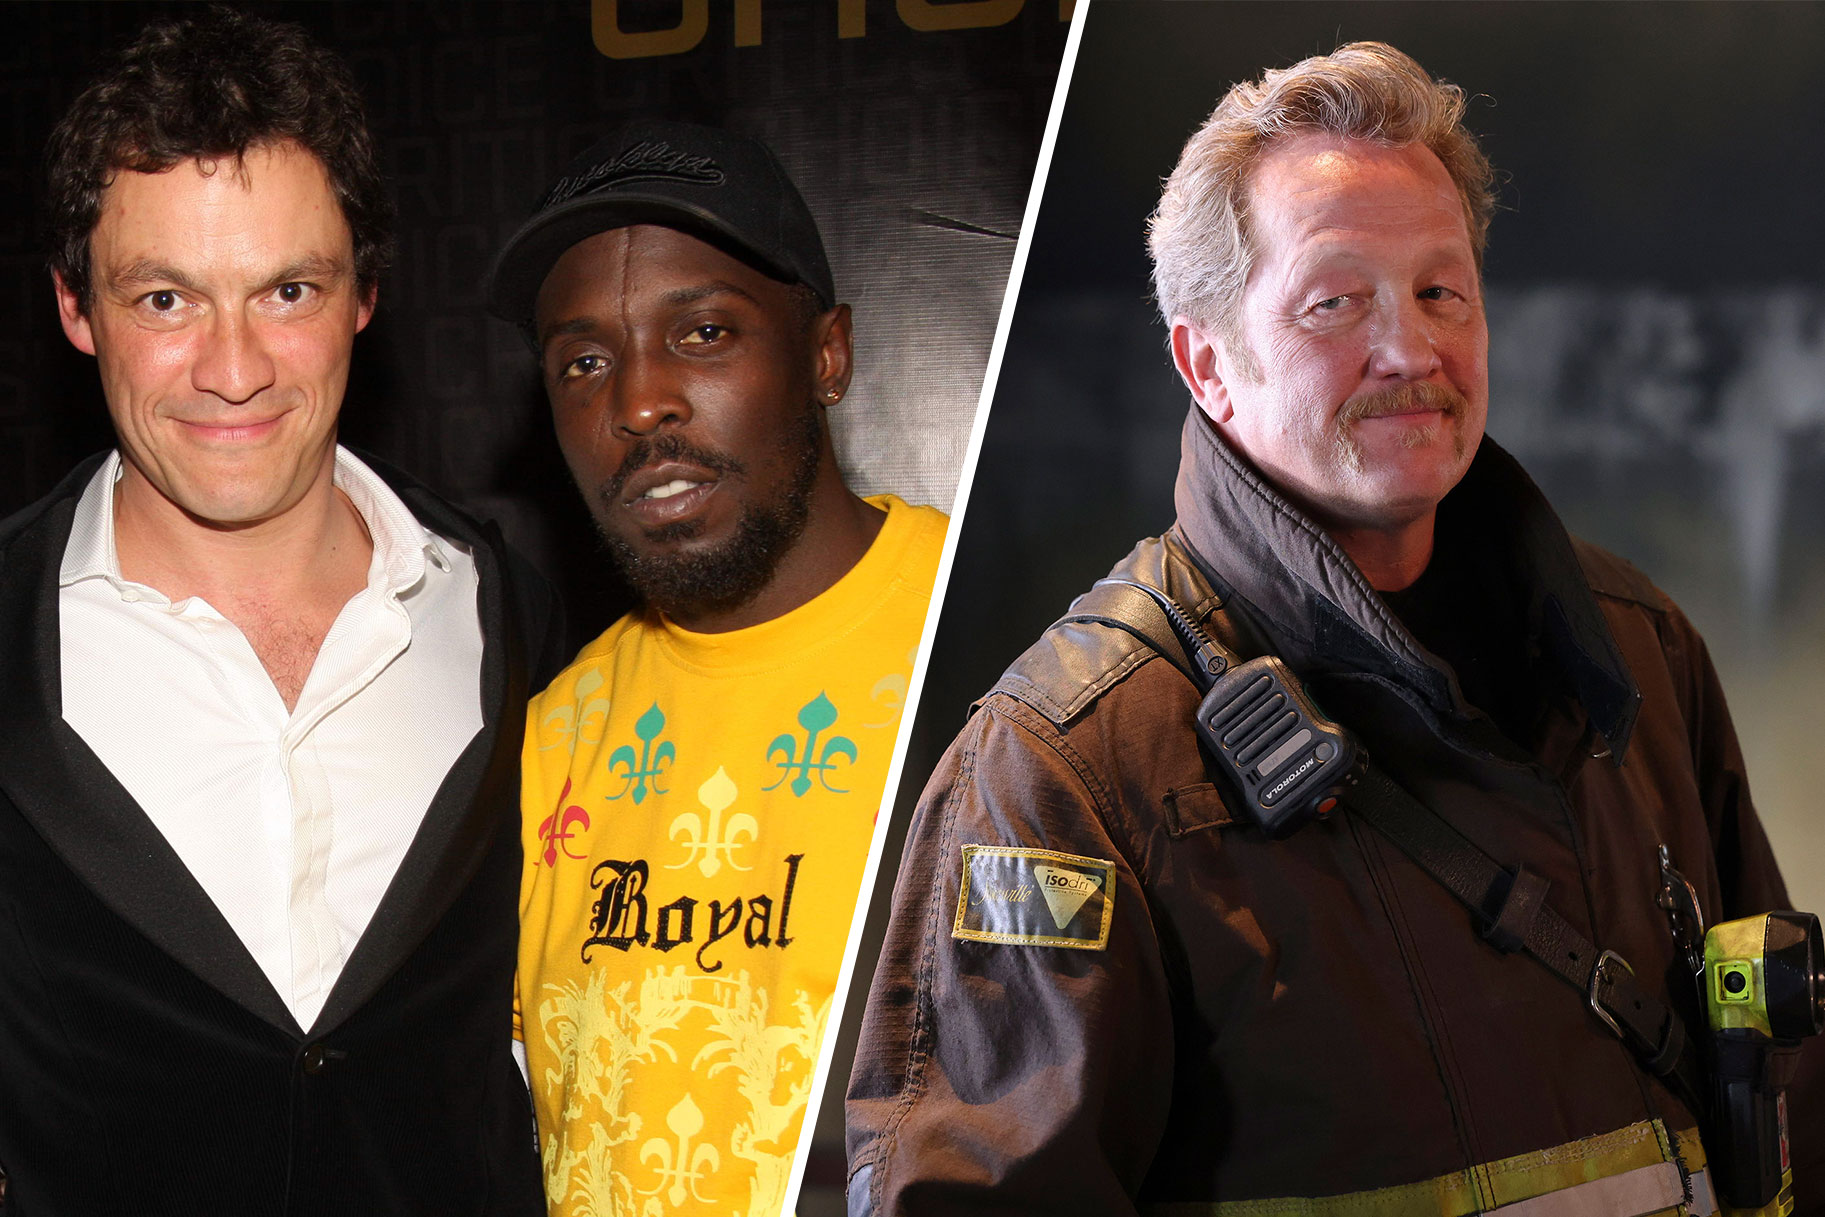 Split Image: Dominic West and Michael K. Williams on the left, Christian Stolte as Mouch on the right